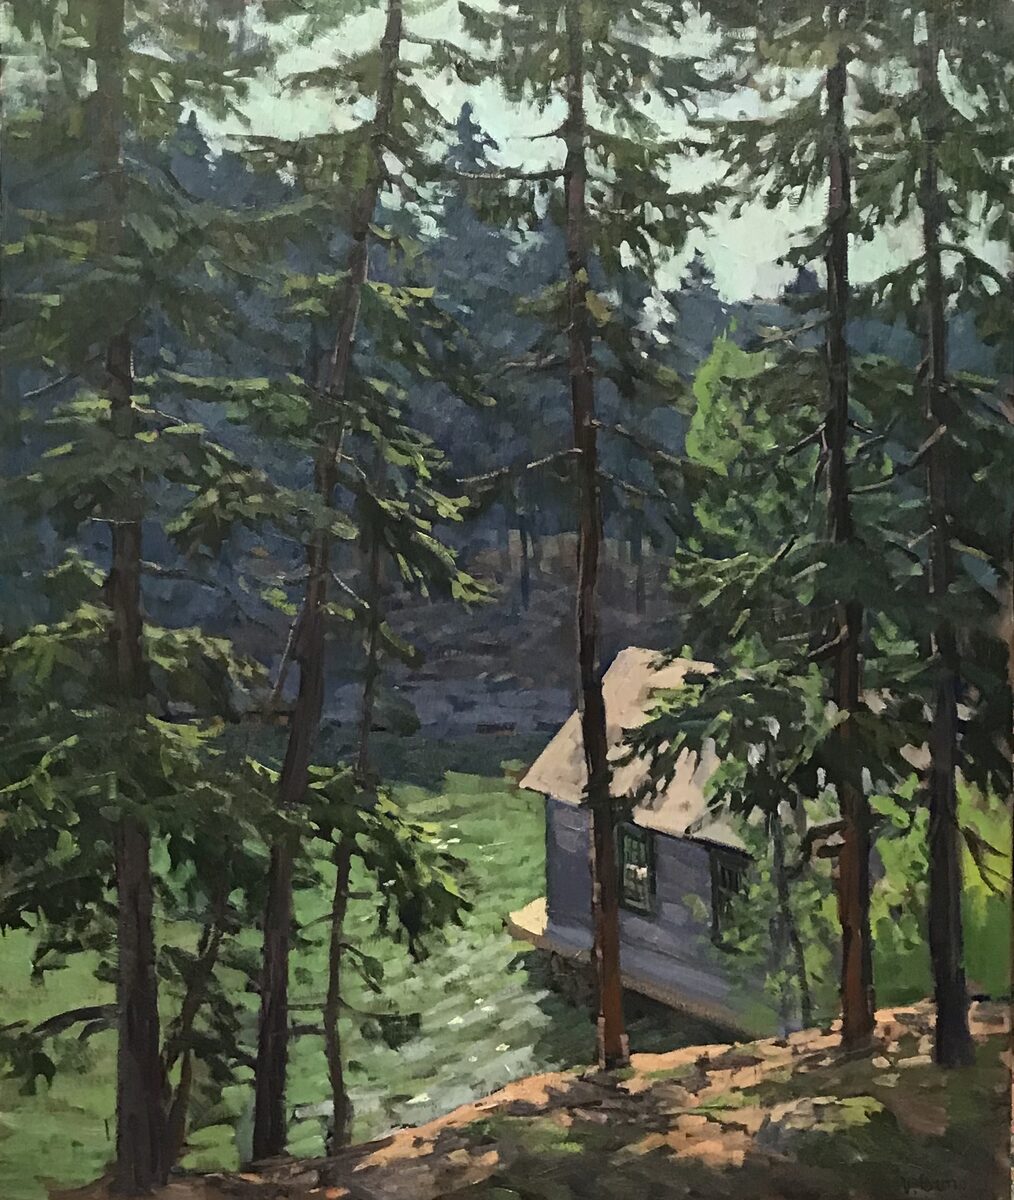 Cabin on the Creek